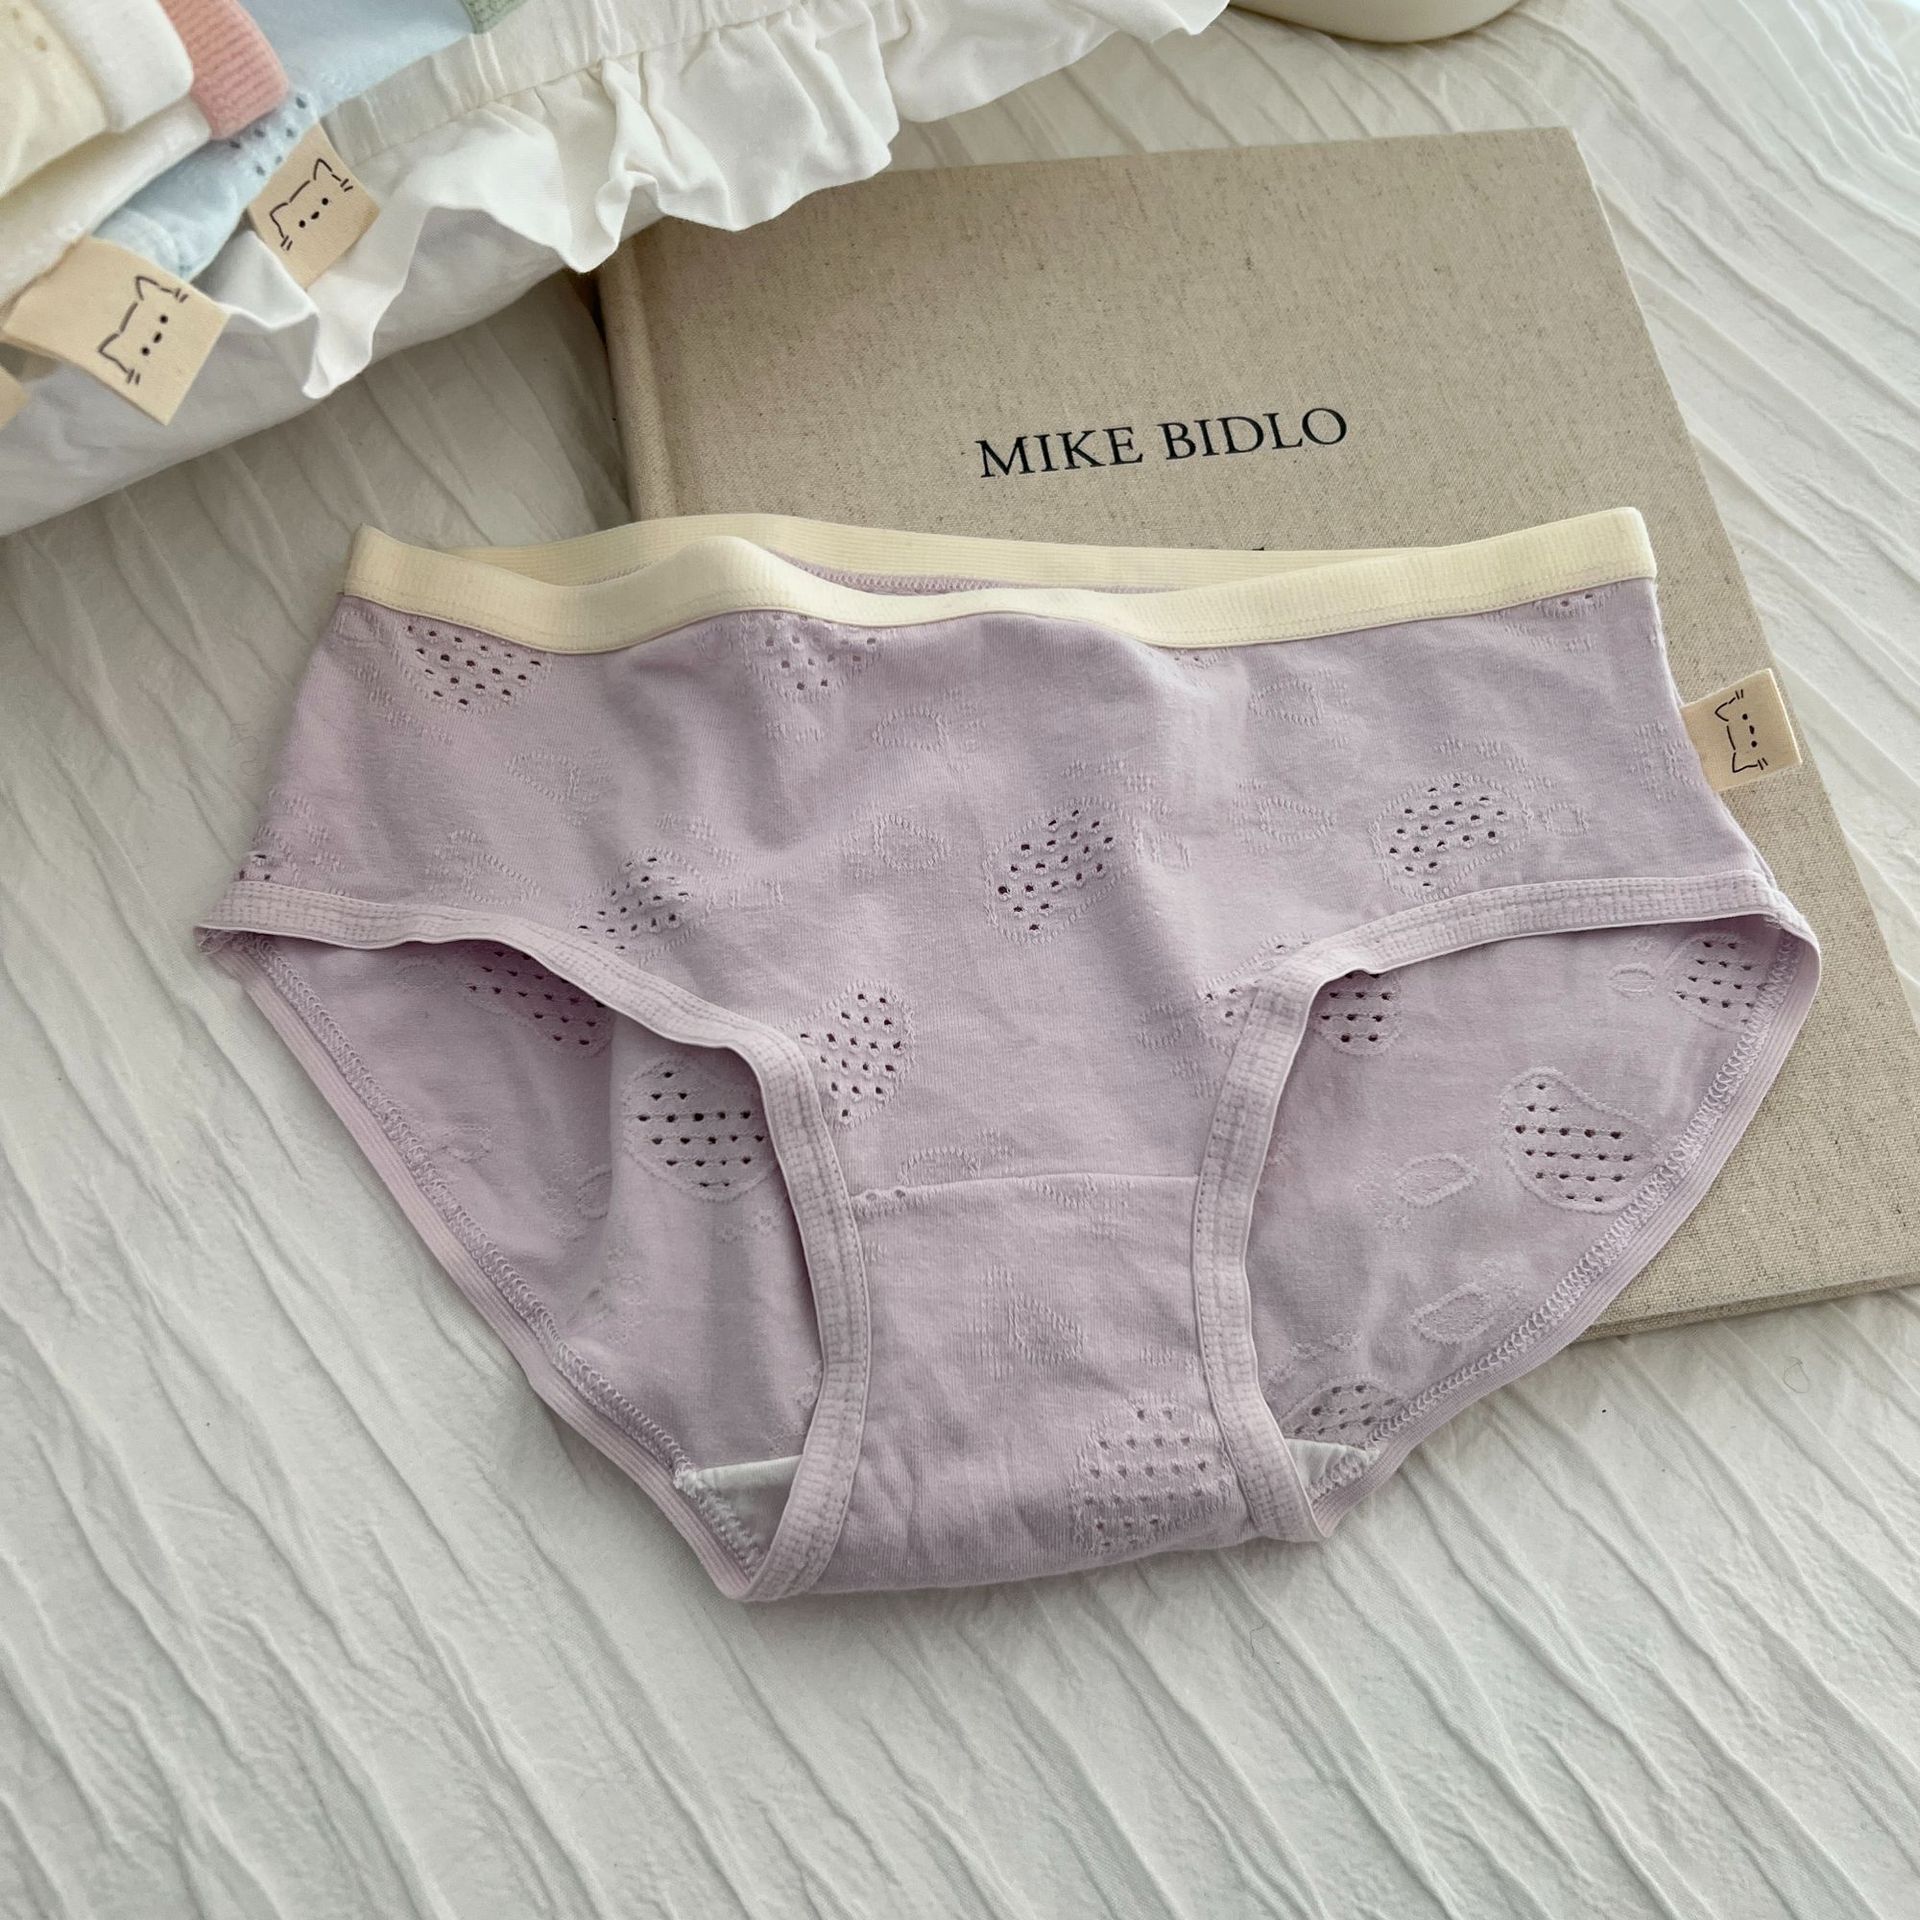 Ka Meow ~ Class a Baby Cotton Cream Underwear Women's Breathable Purified Cotton Crotch Mid-Waist Basic Solid Color Girl Briefs